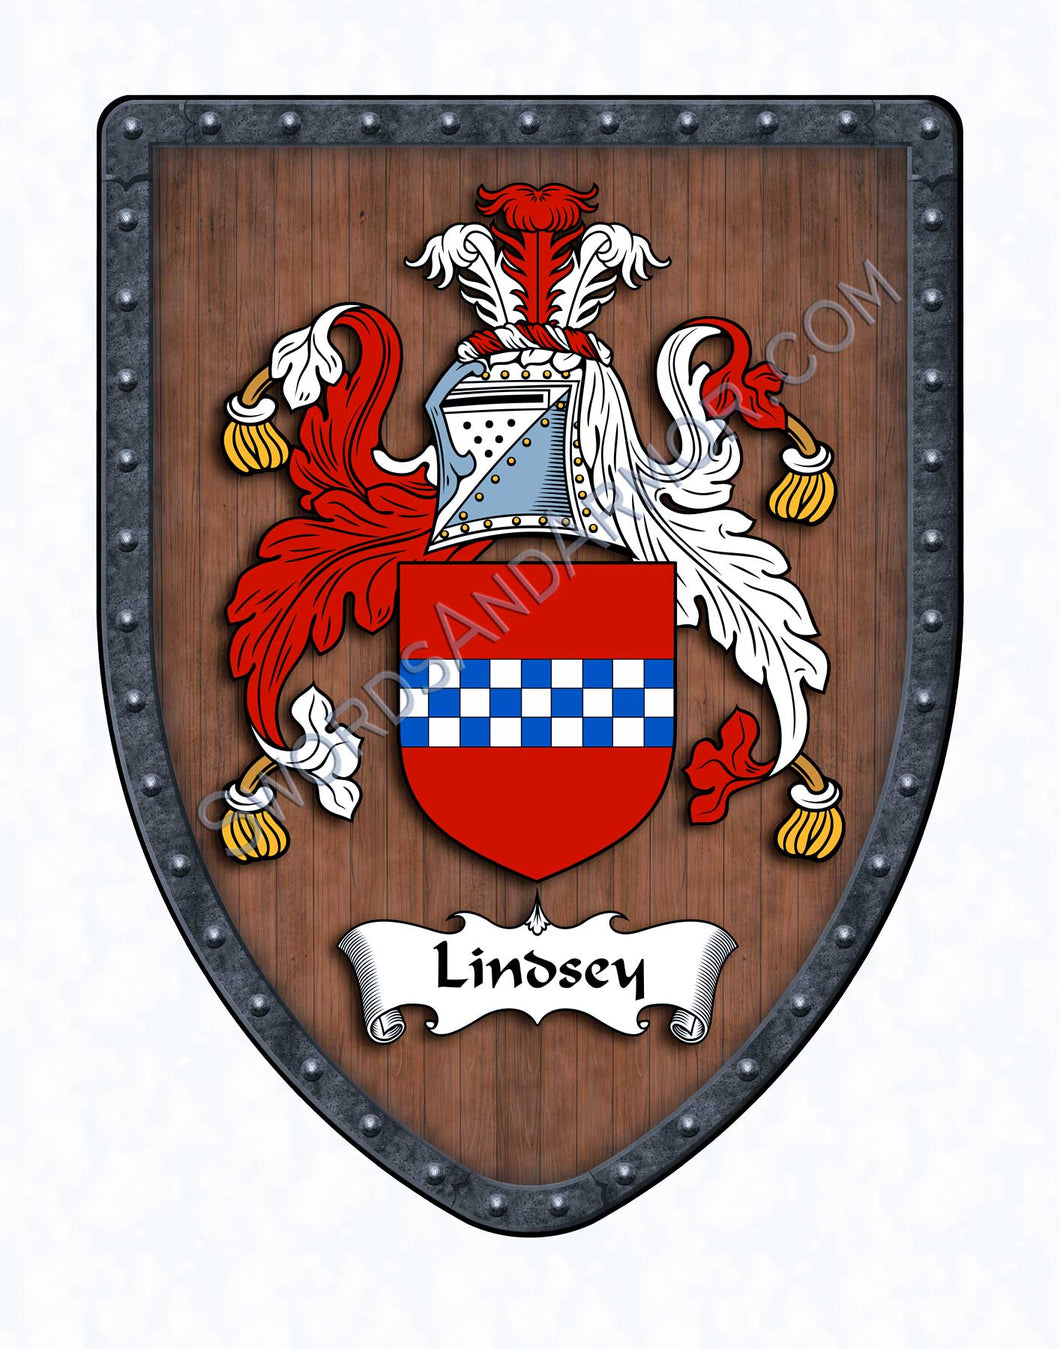 Lindsey Family Crest Coat of Arms Shield